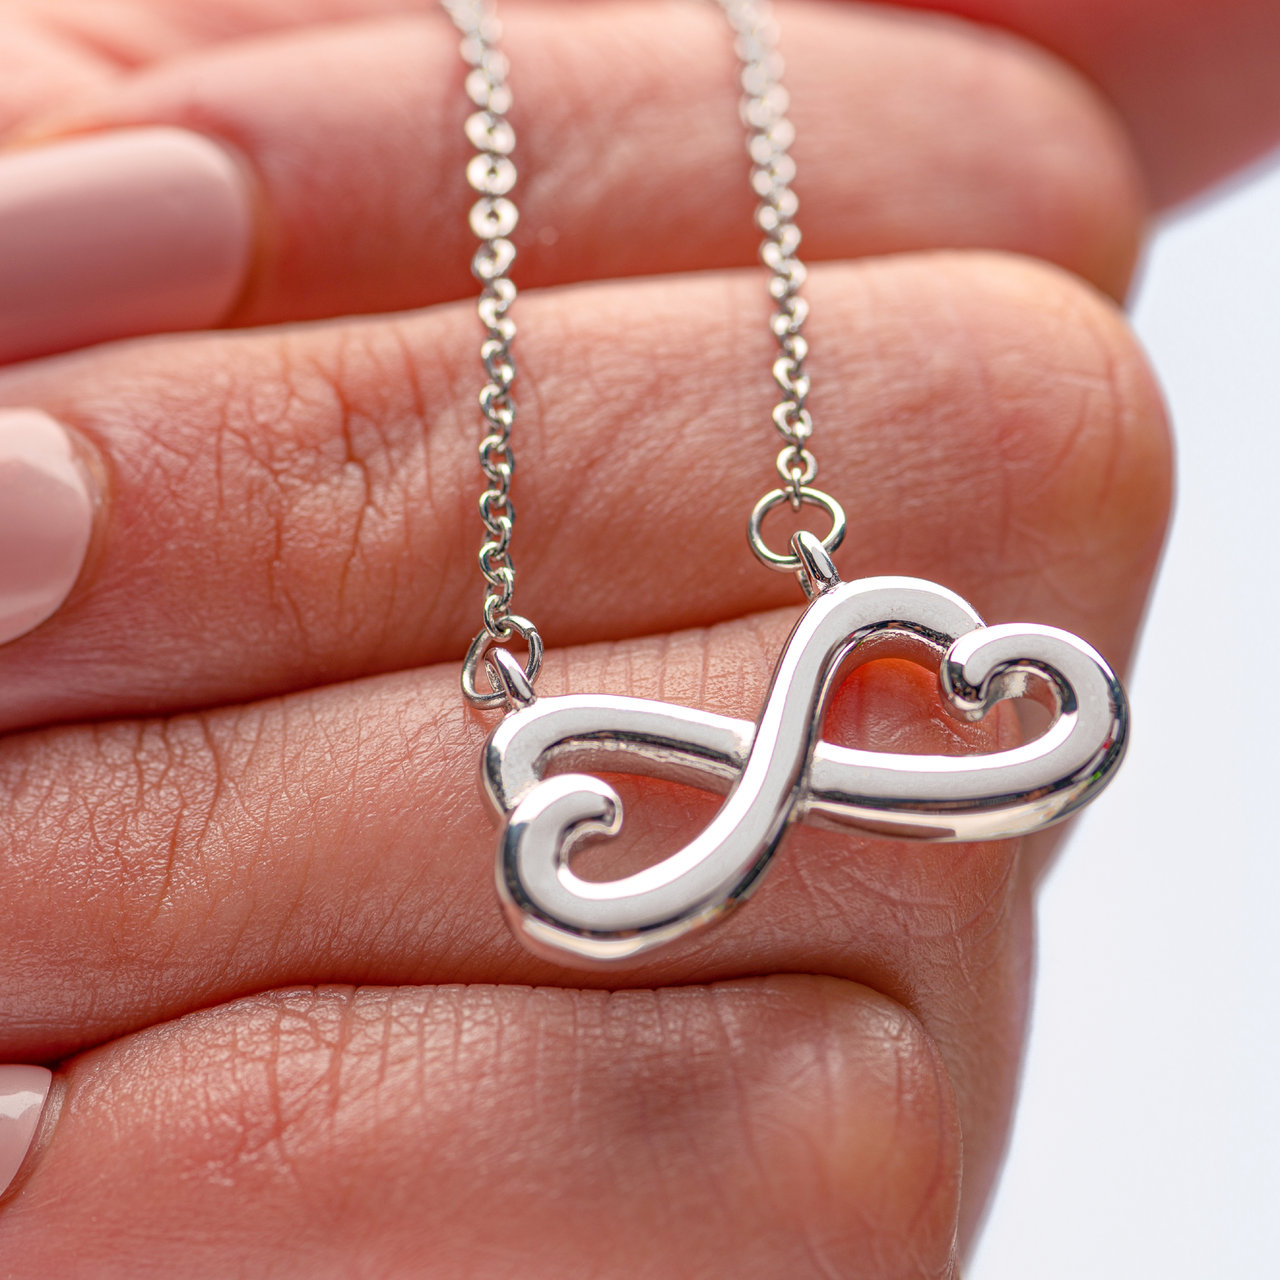 Granddaughter, Always Loving You - Infinity Hearts Necklace (GD80)